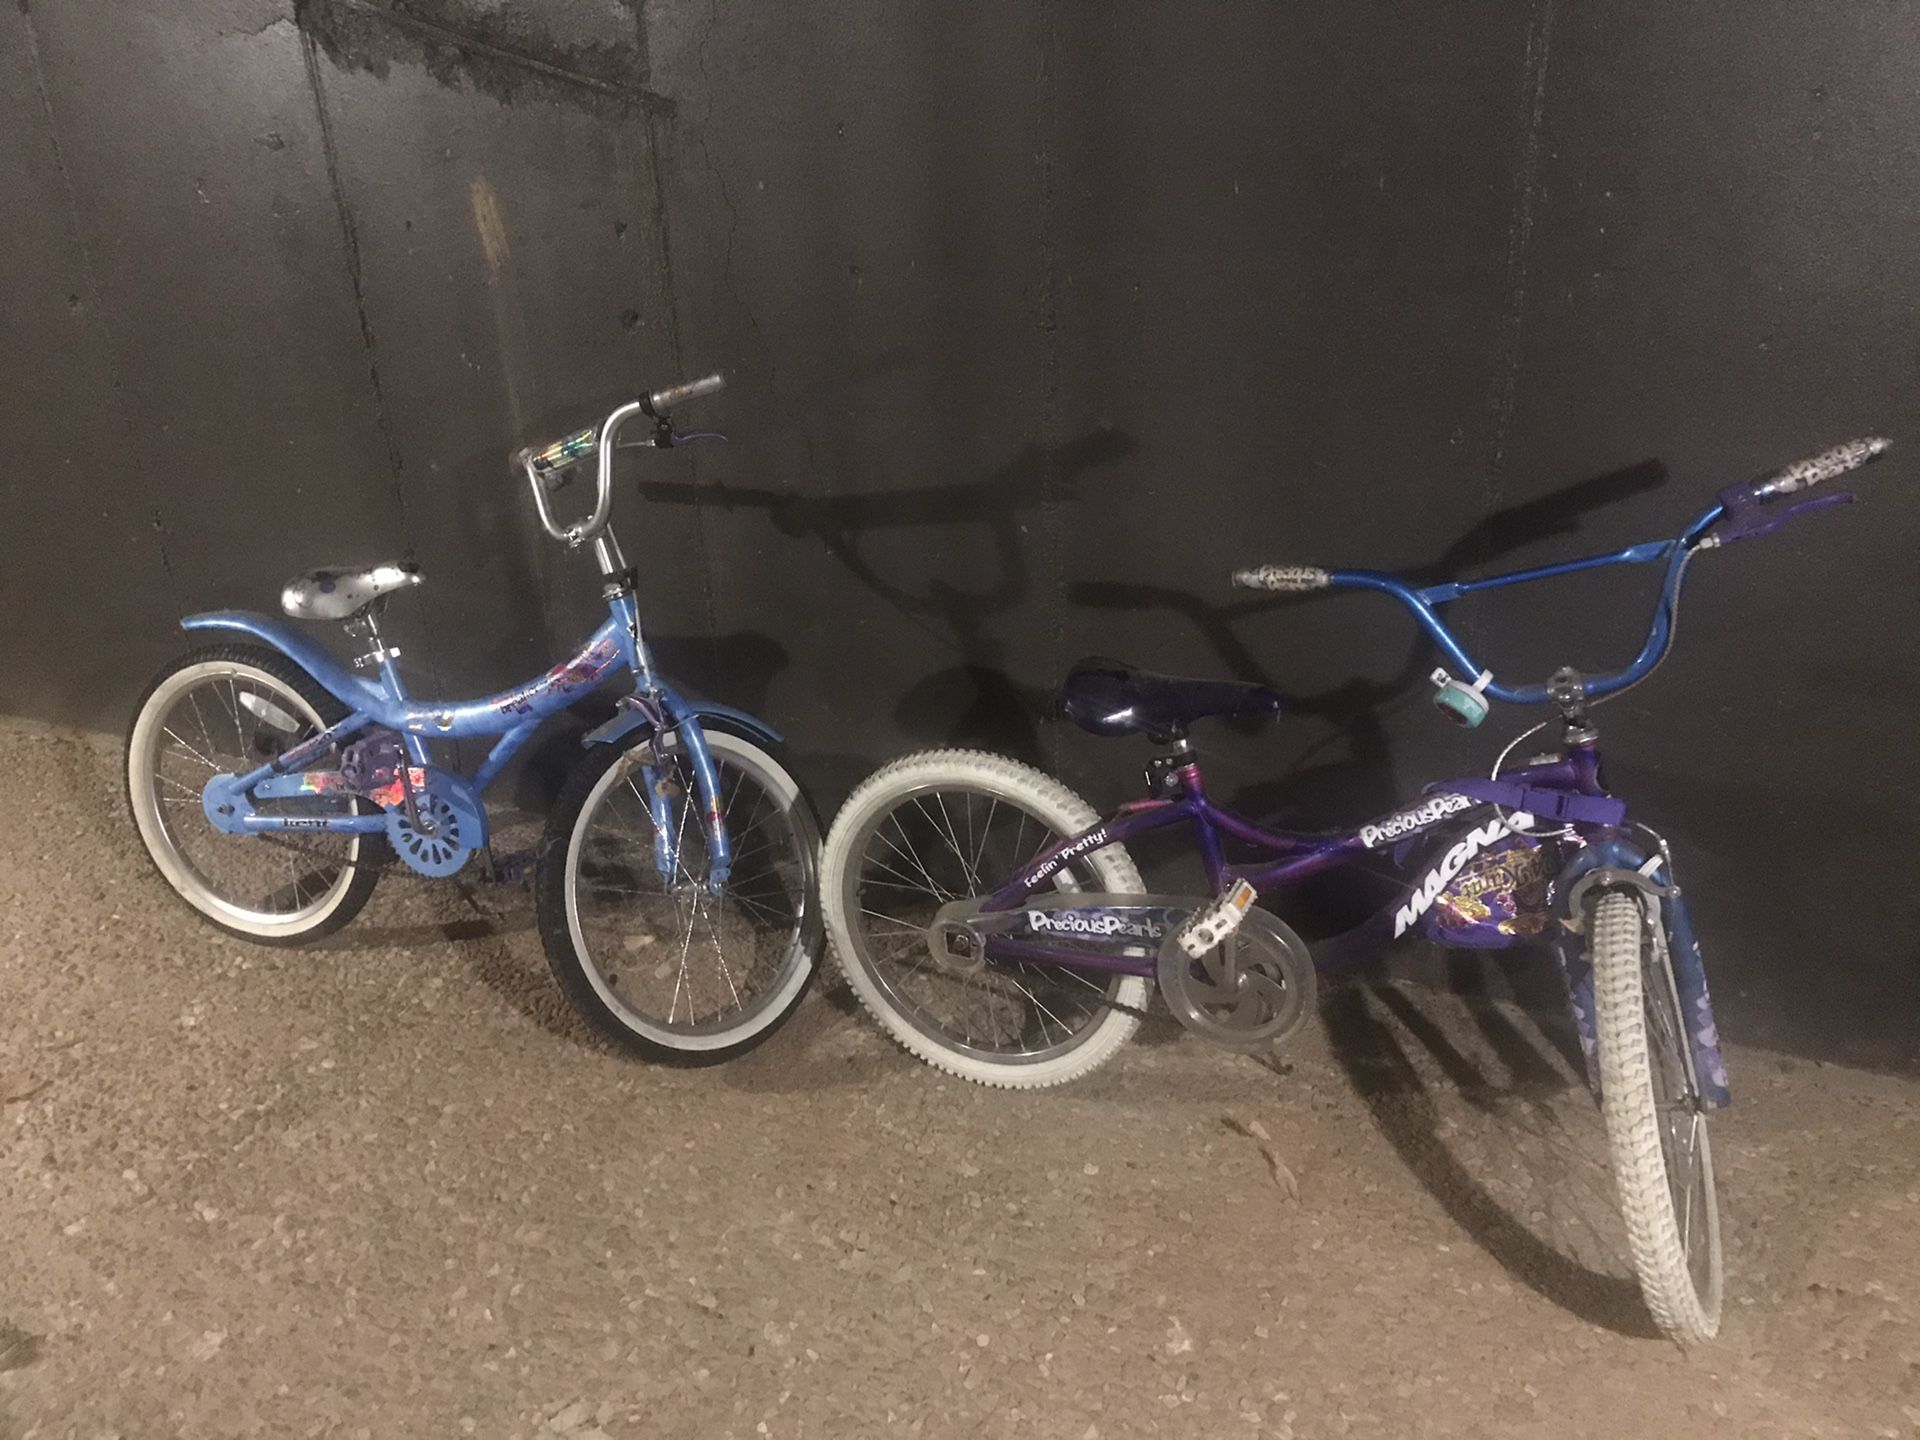 Two nice bikes for little girls COVID-19 savers You can’t go anywhere take them outside and let them ride bikes